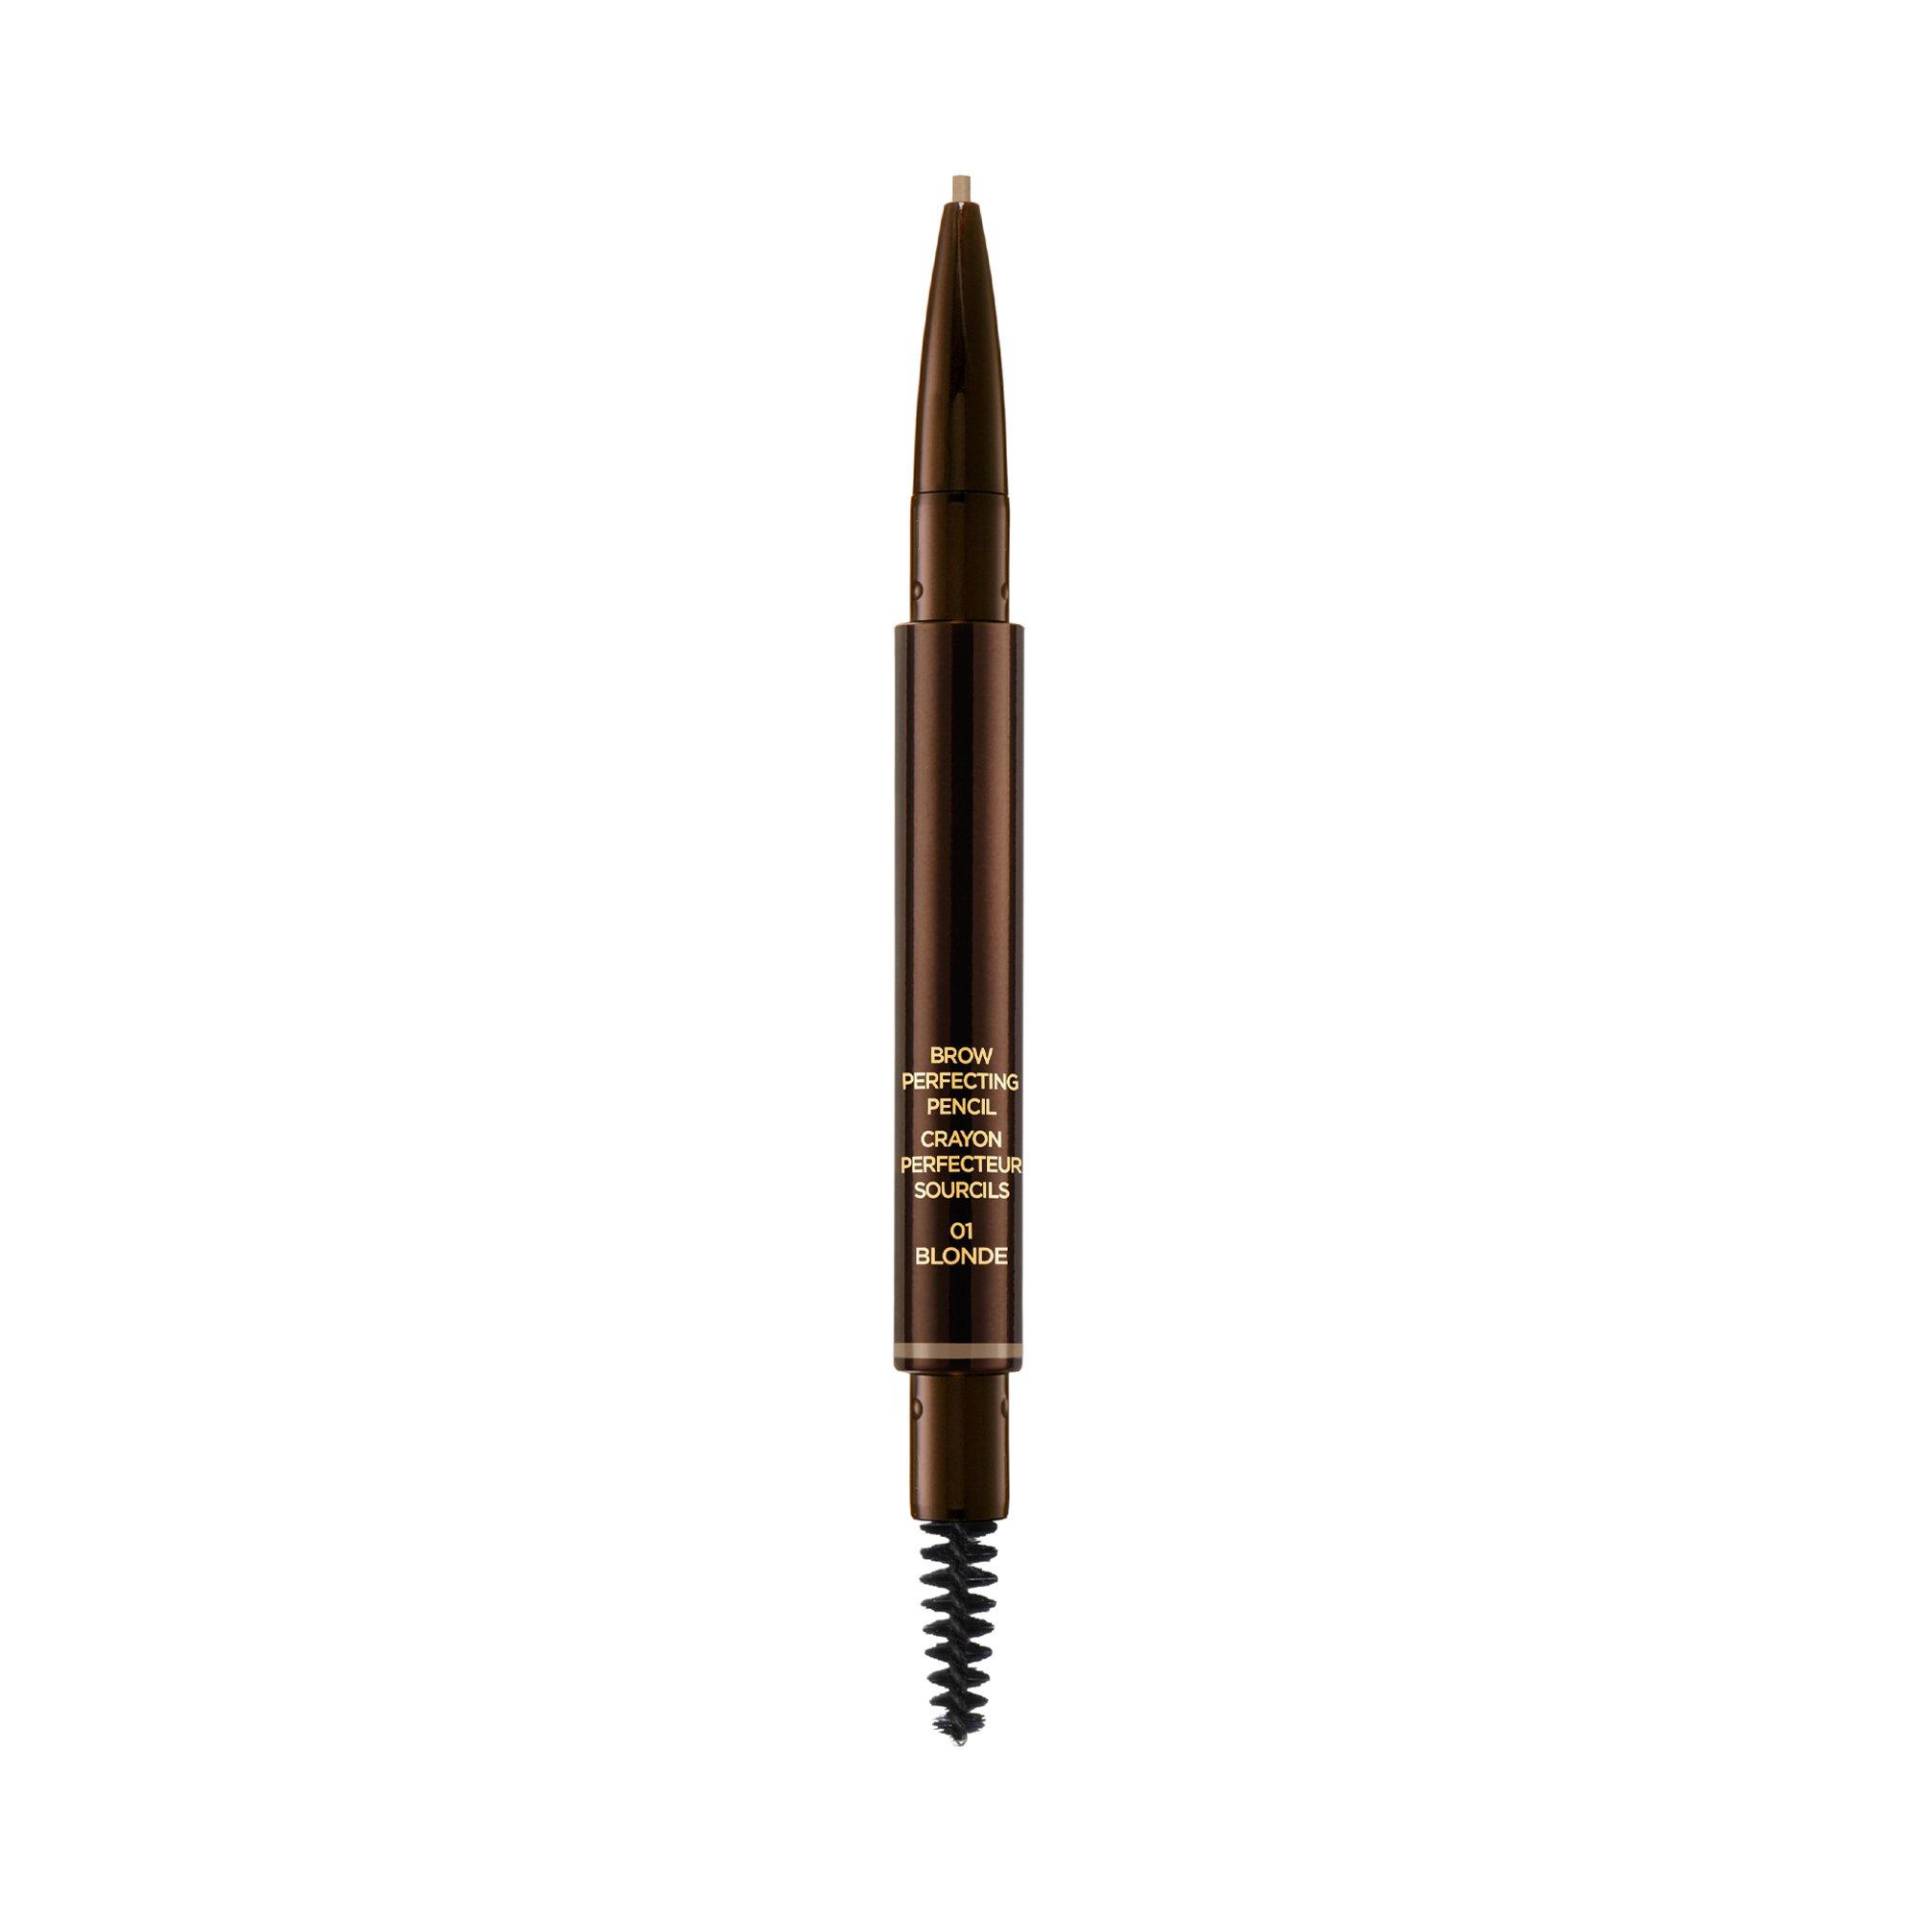 Brow Perfecting Pencil Damen Taupe von TOM FORD